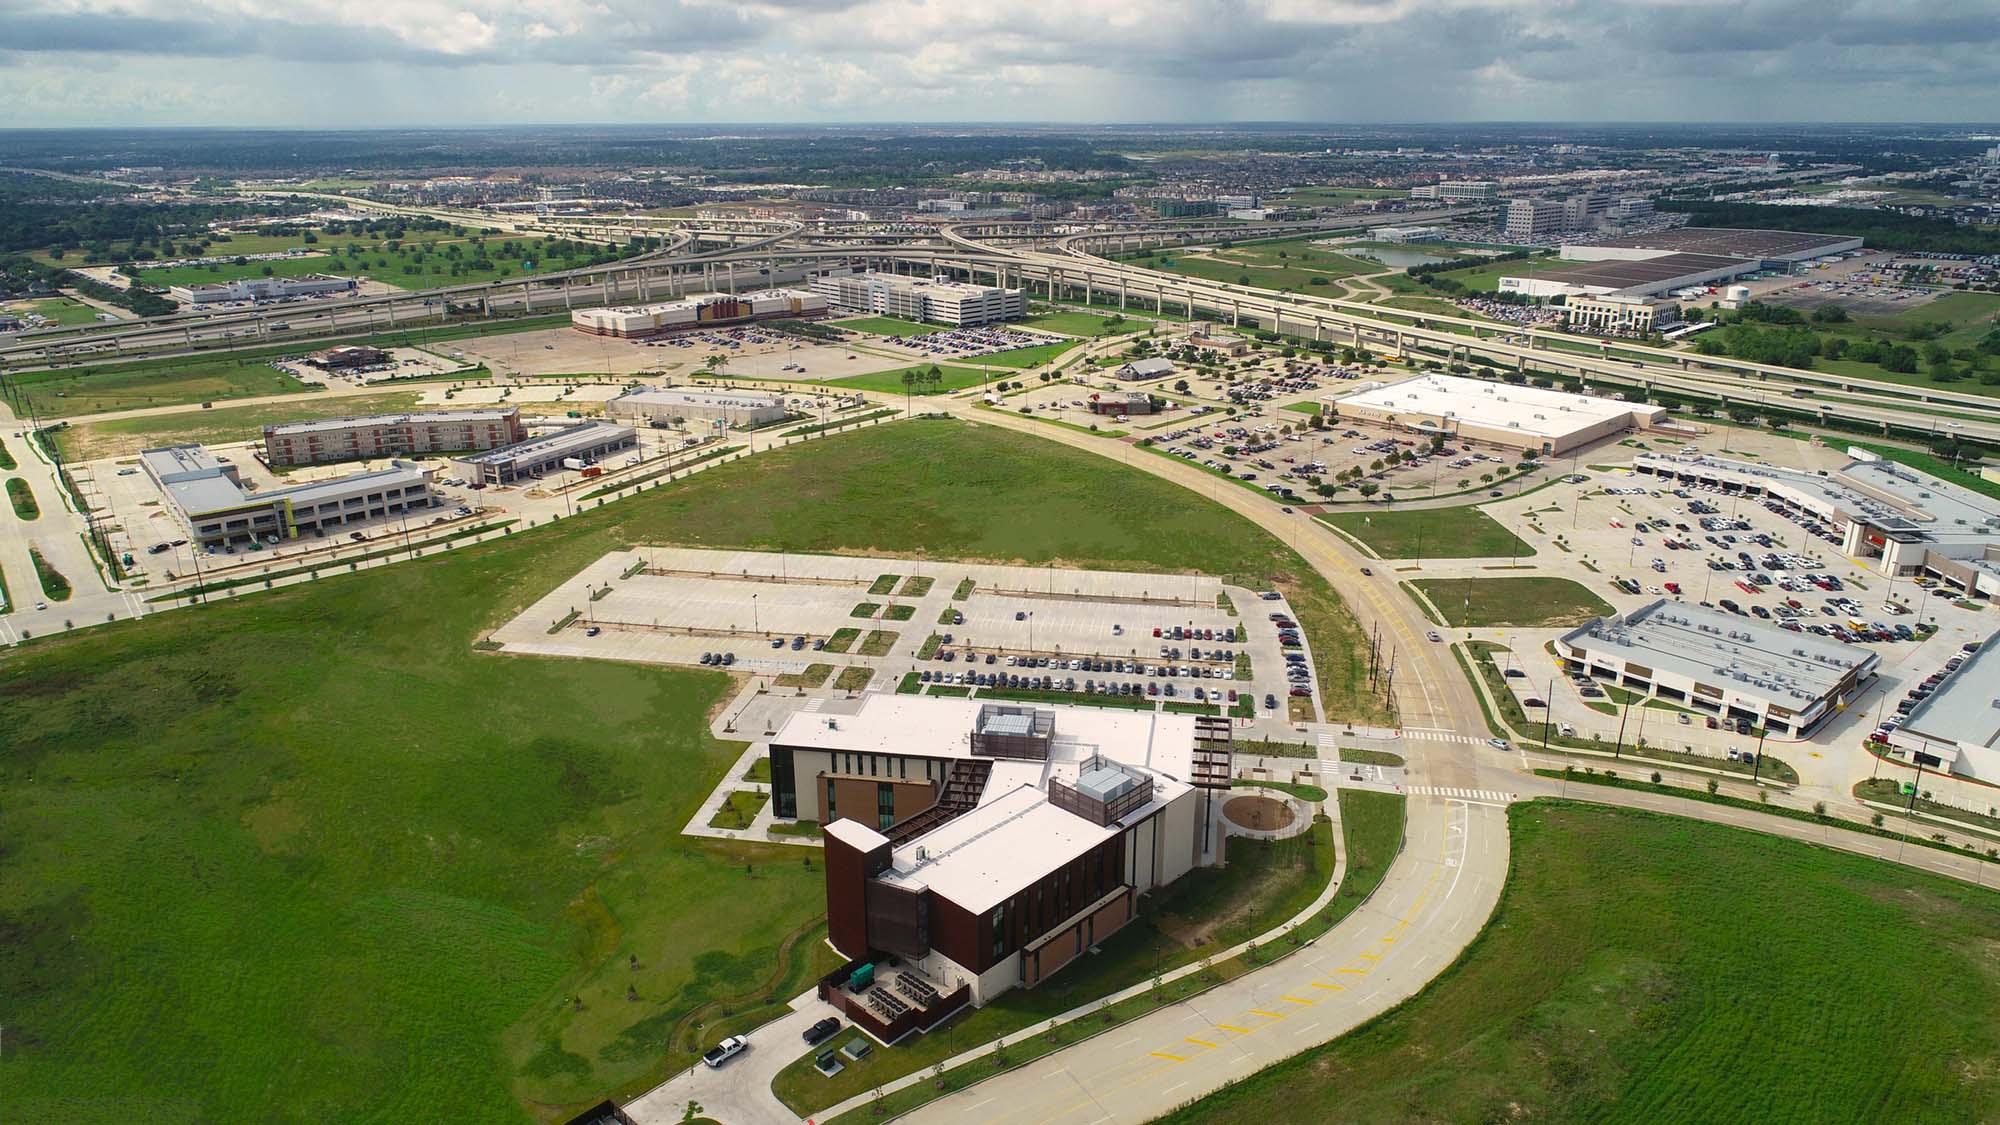 Ariel view of the Katy Academic Building with the Interstate 10 and Highway 99 intersection in the background.